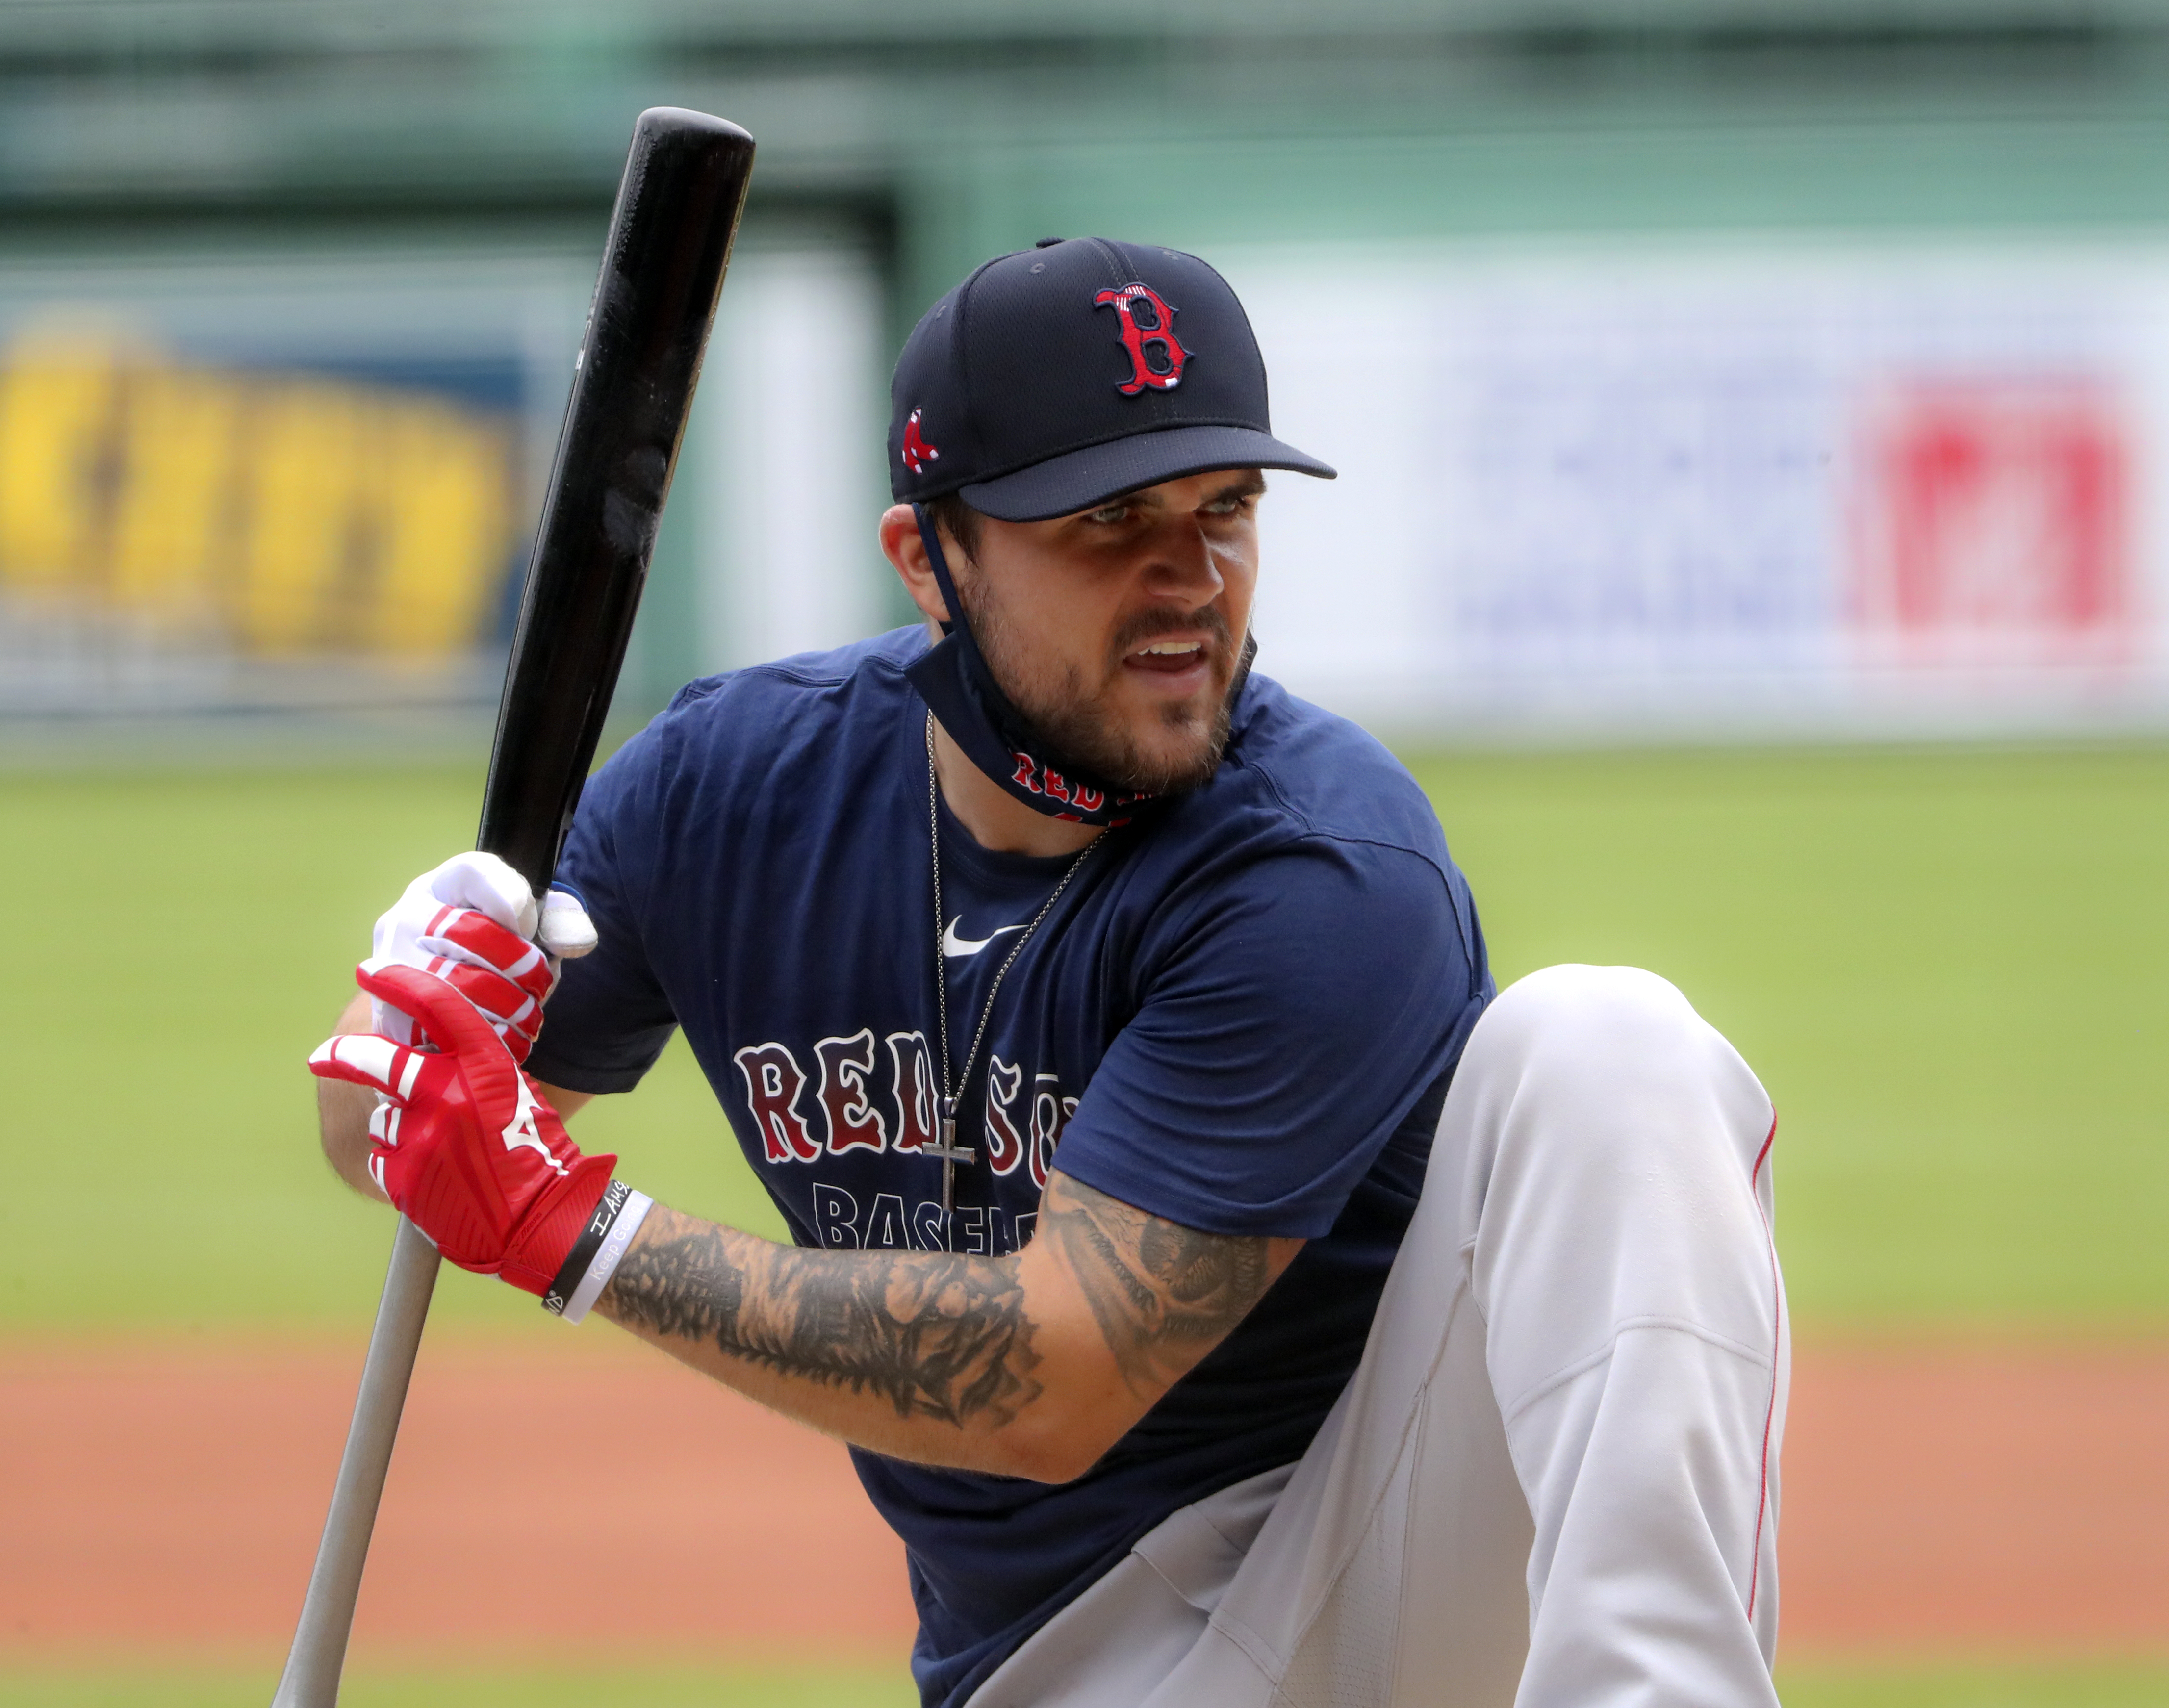 SoxProspects News: Red Sox select Michael Chavis with the 26th overall pick